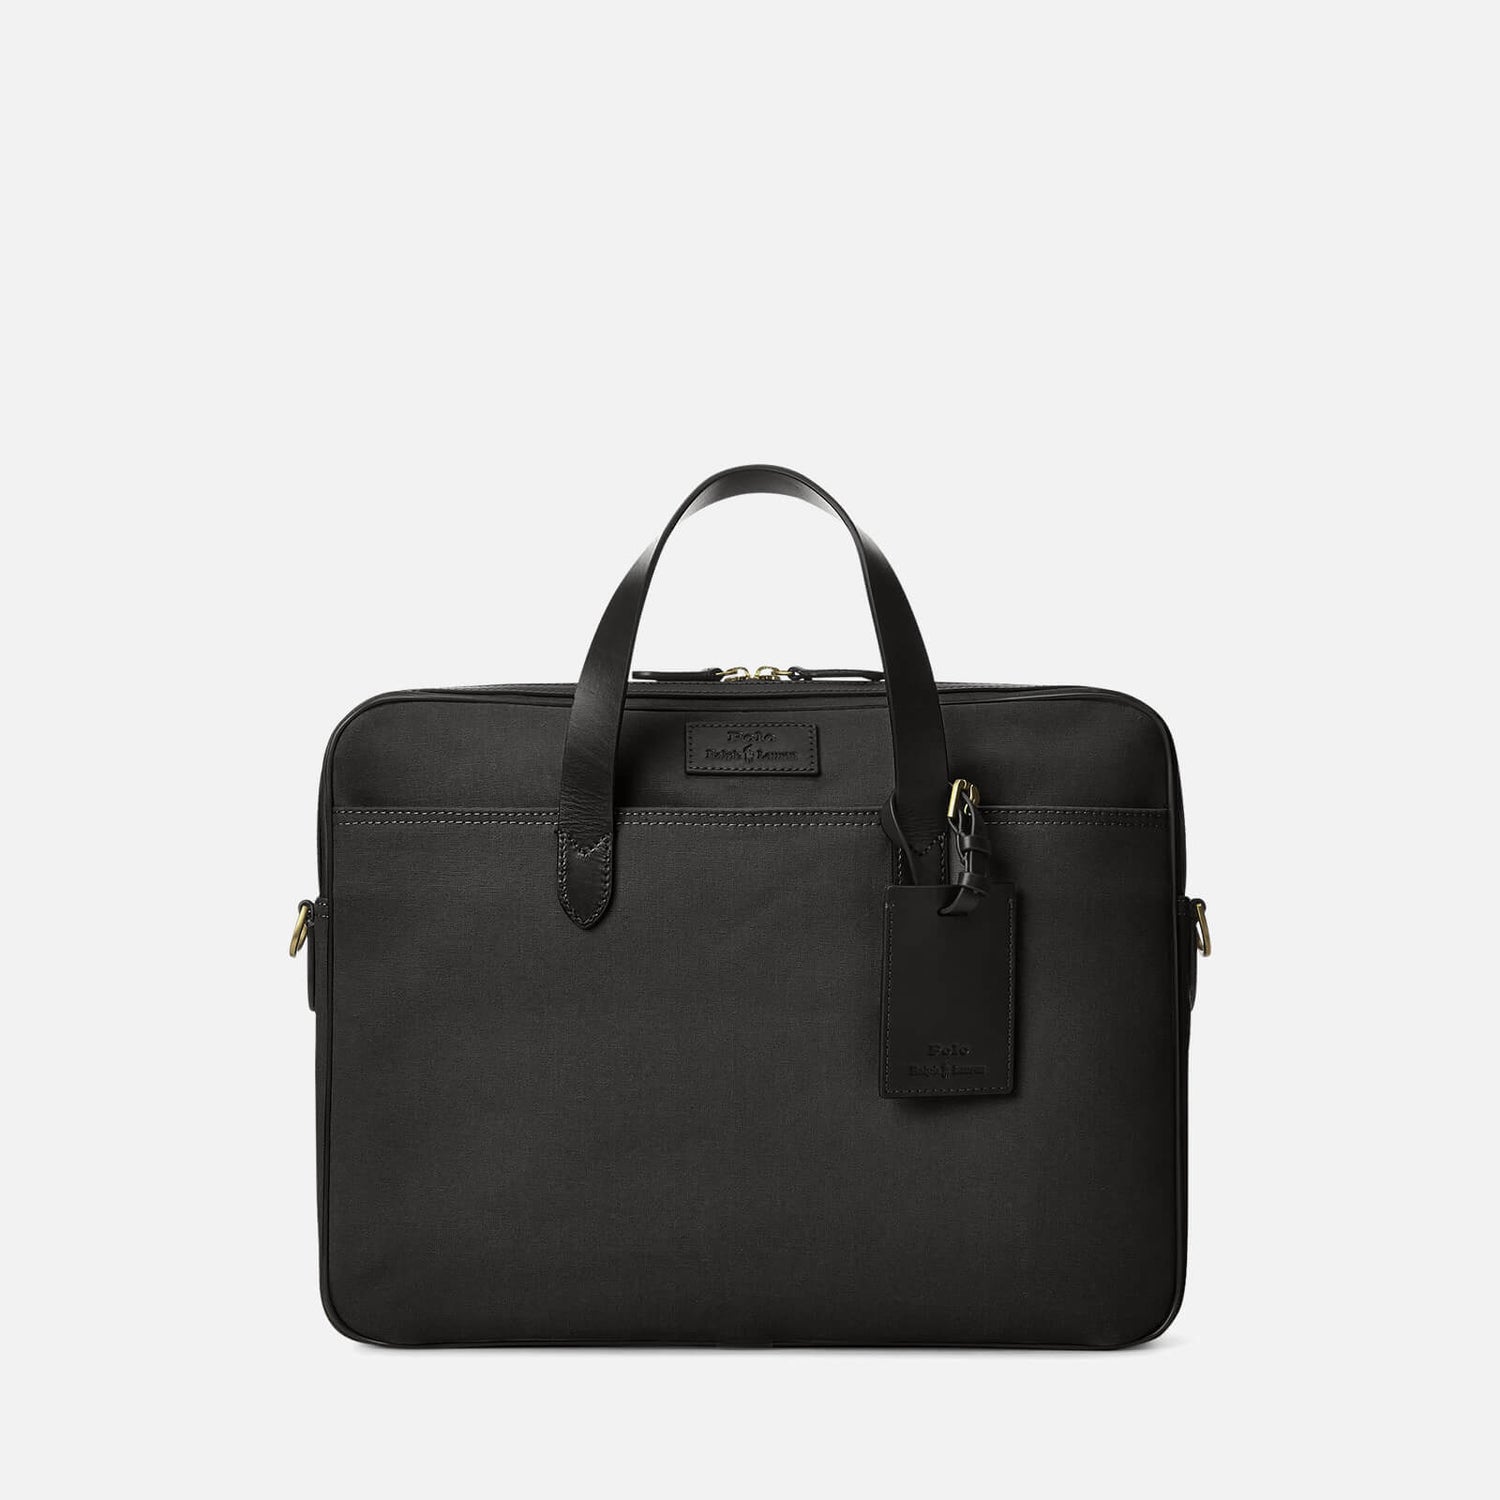 Polo Ralph Lauren Smooth Leather Commuter Briefcase - Black